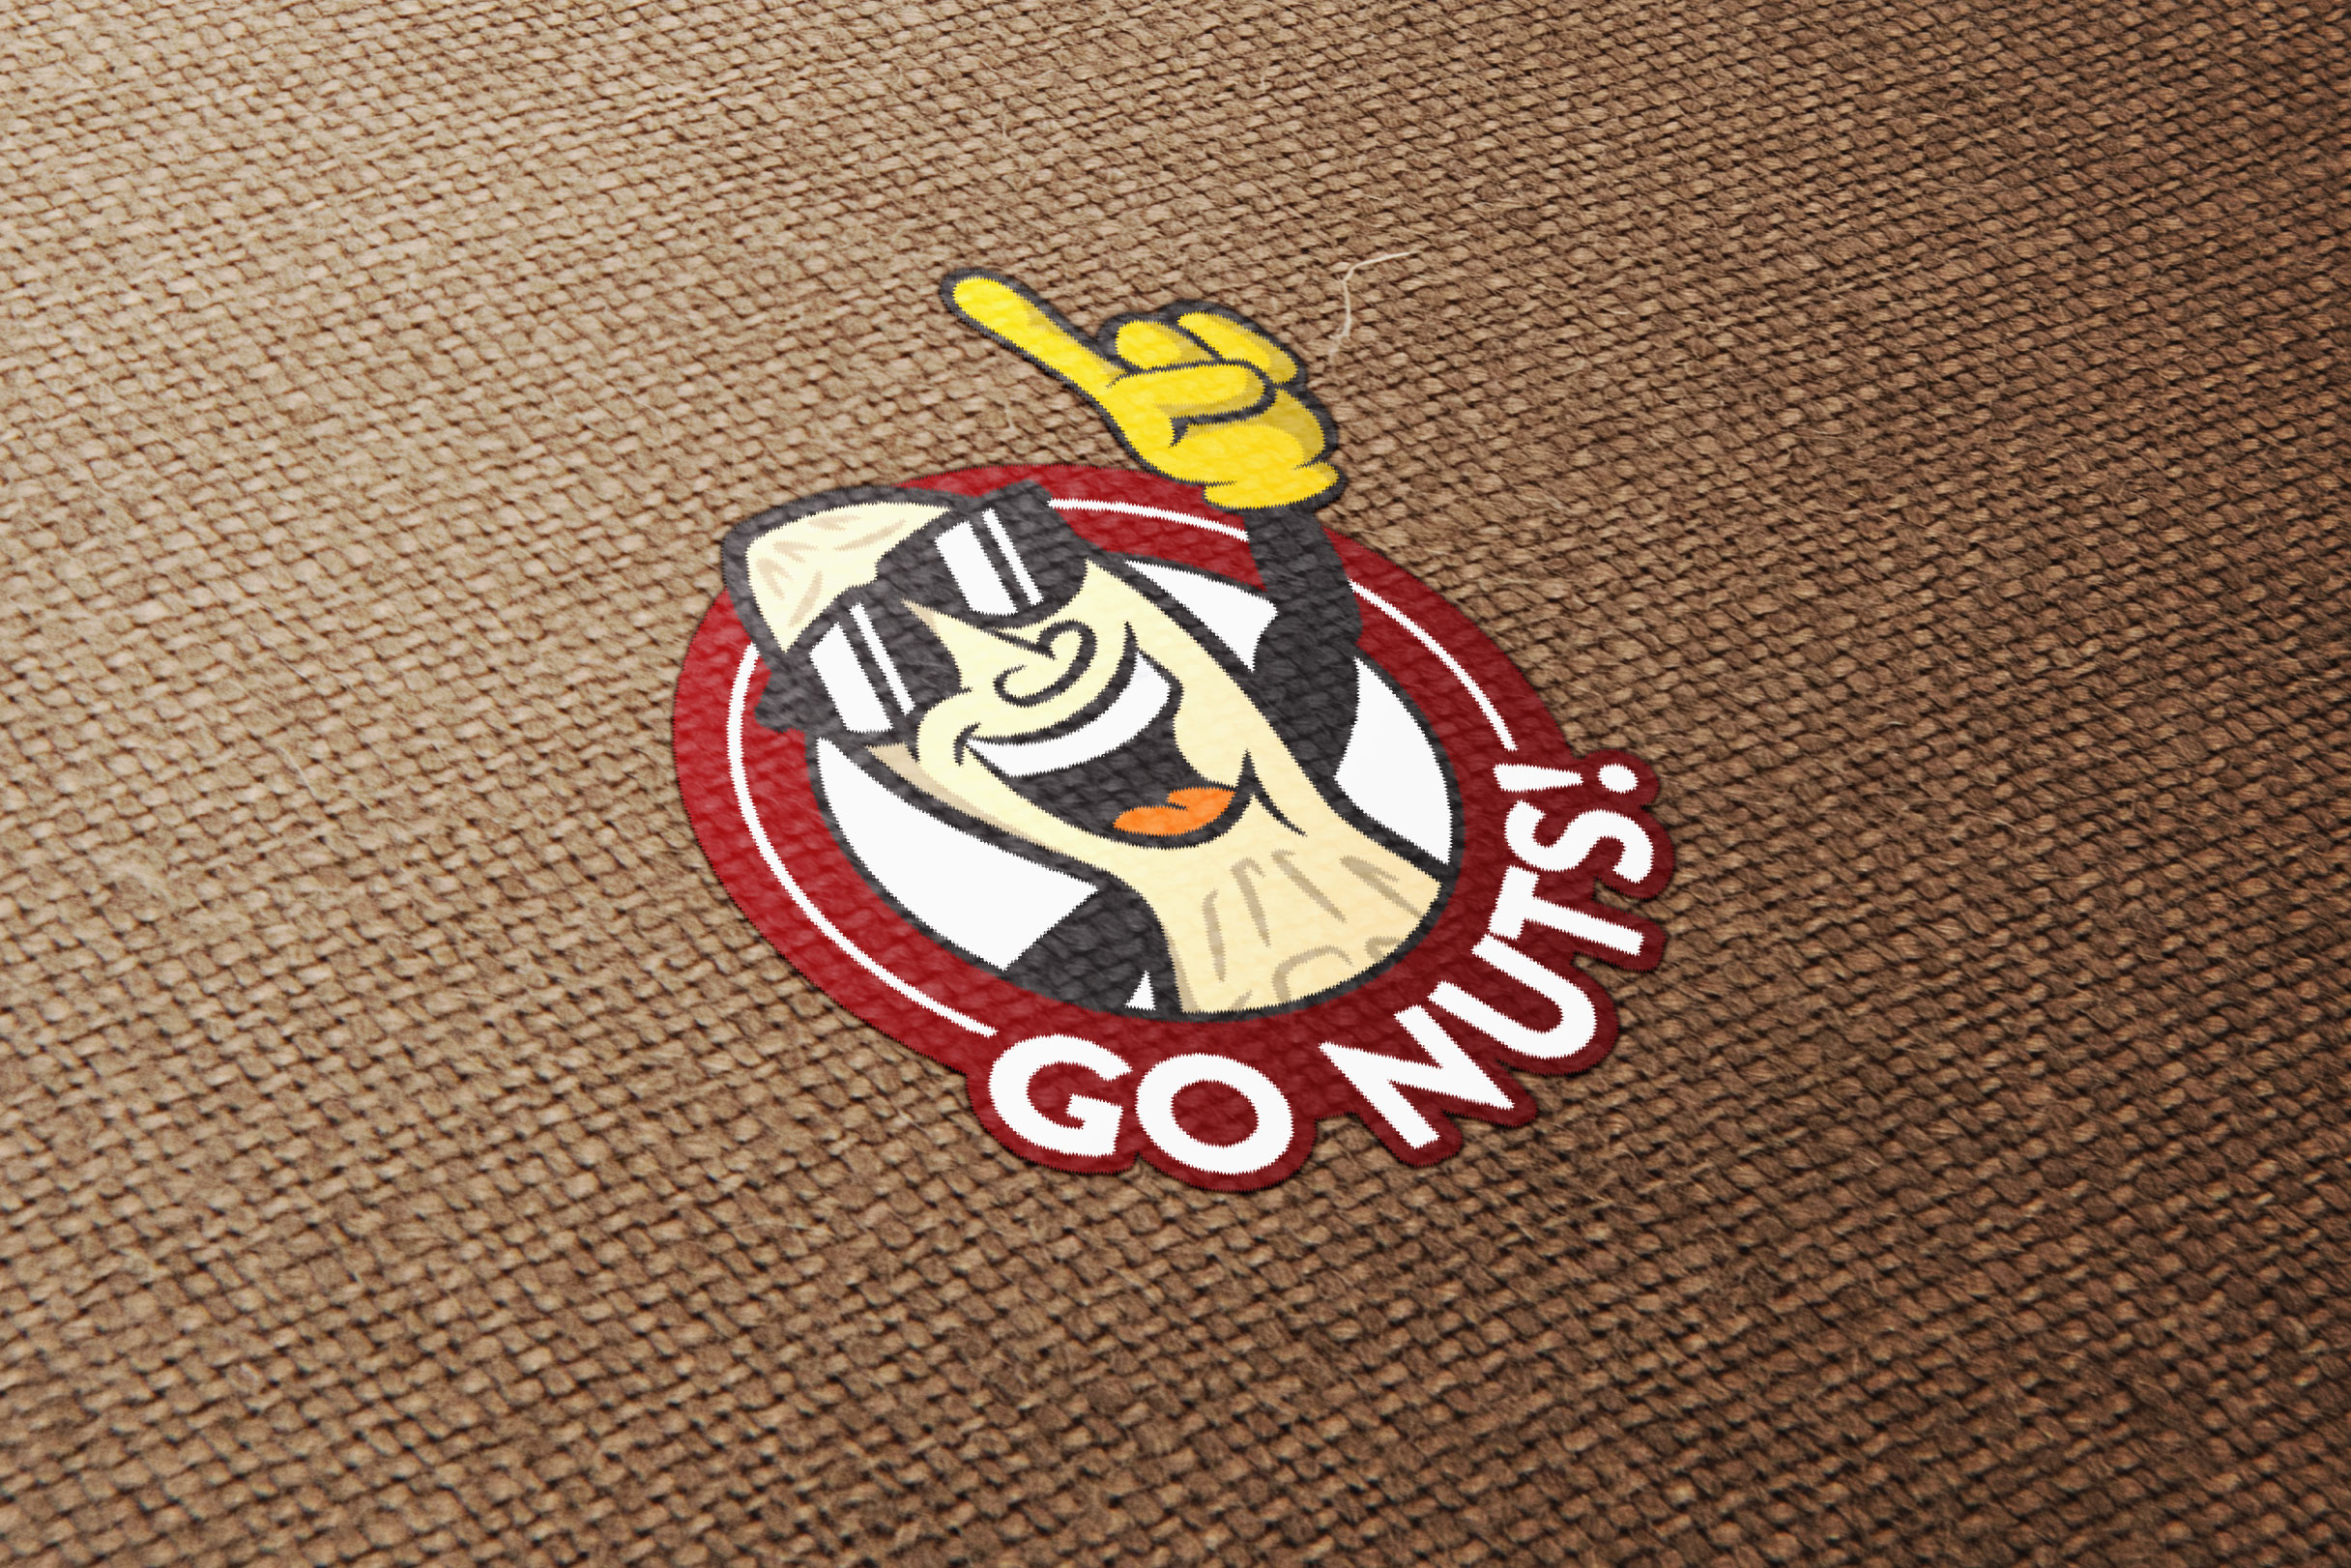 Whitley's Peanuts Mascot "Whit" – on a bag of nuts